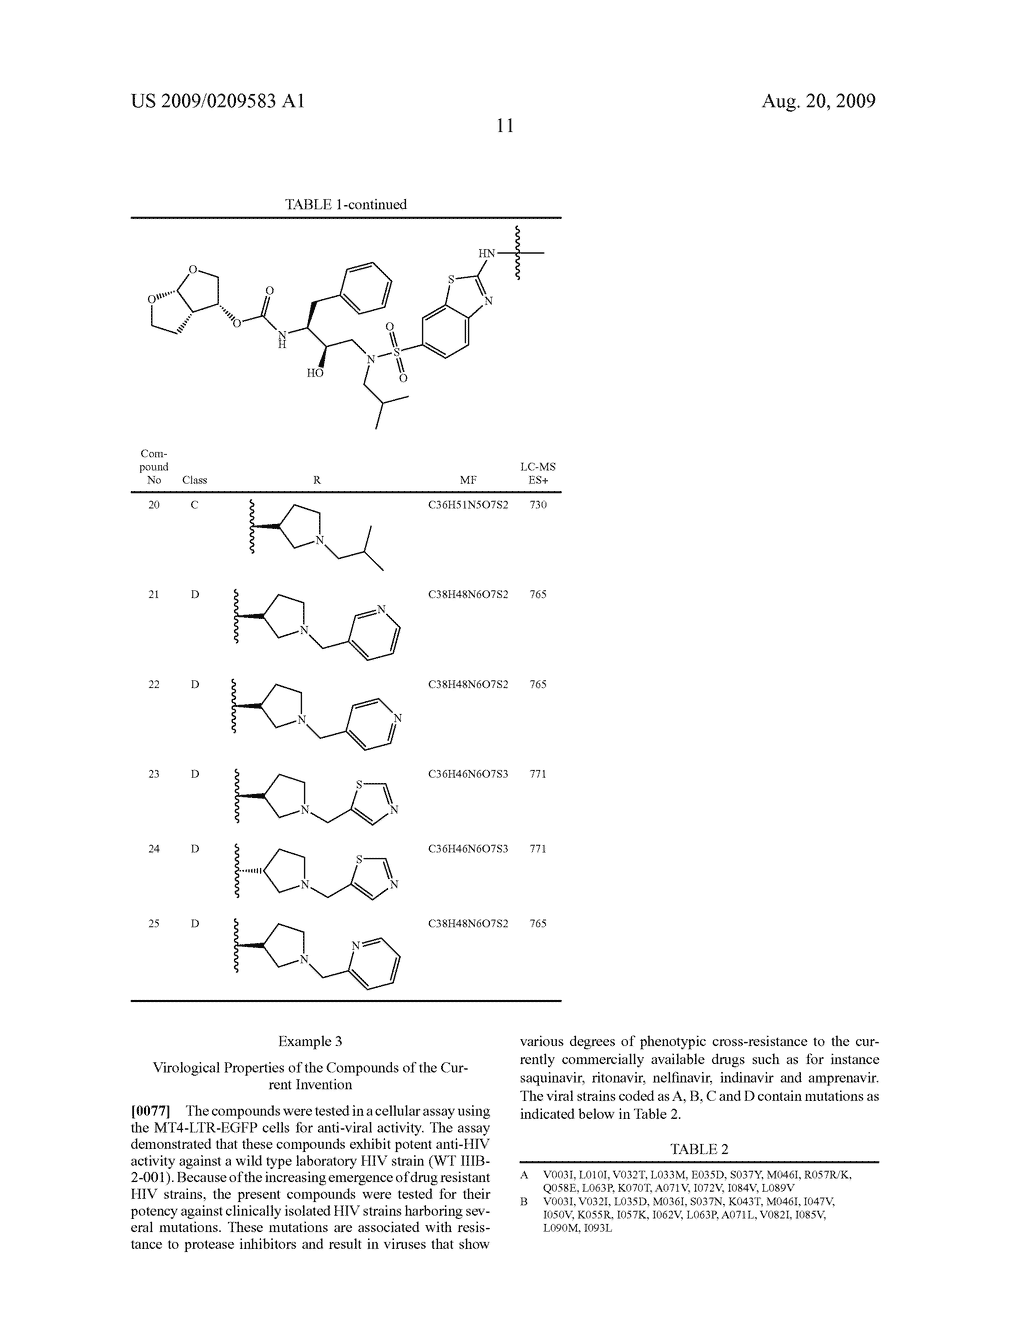 2-(SUBSTITUTED-AMINO)-BENZOTHIAZOLE SULFONAMIDE HIV PROTEASE INHIBITORS - diagram, schematic, and image 13